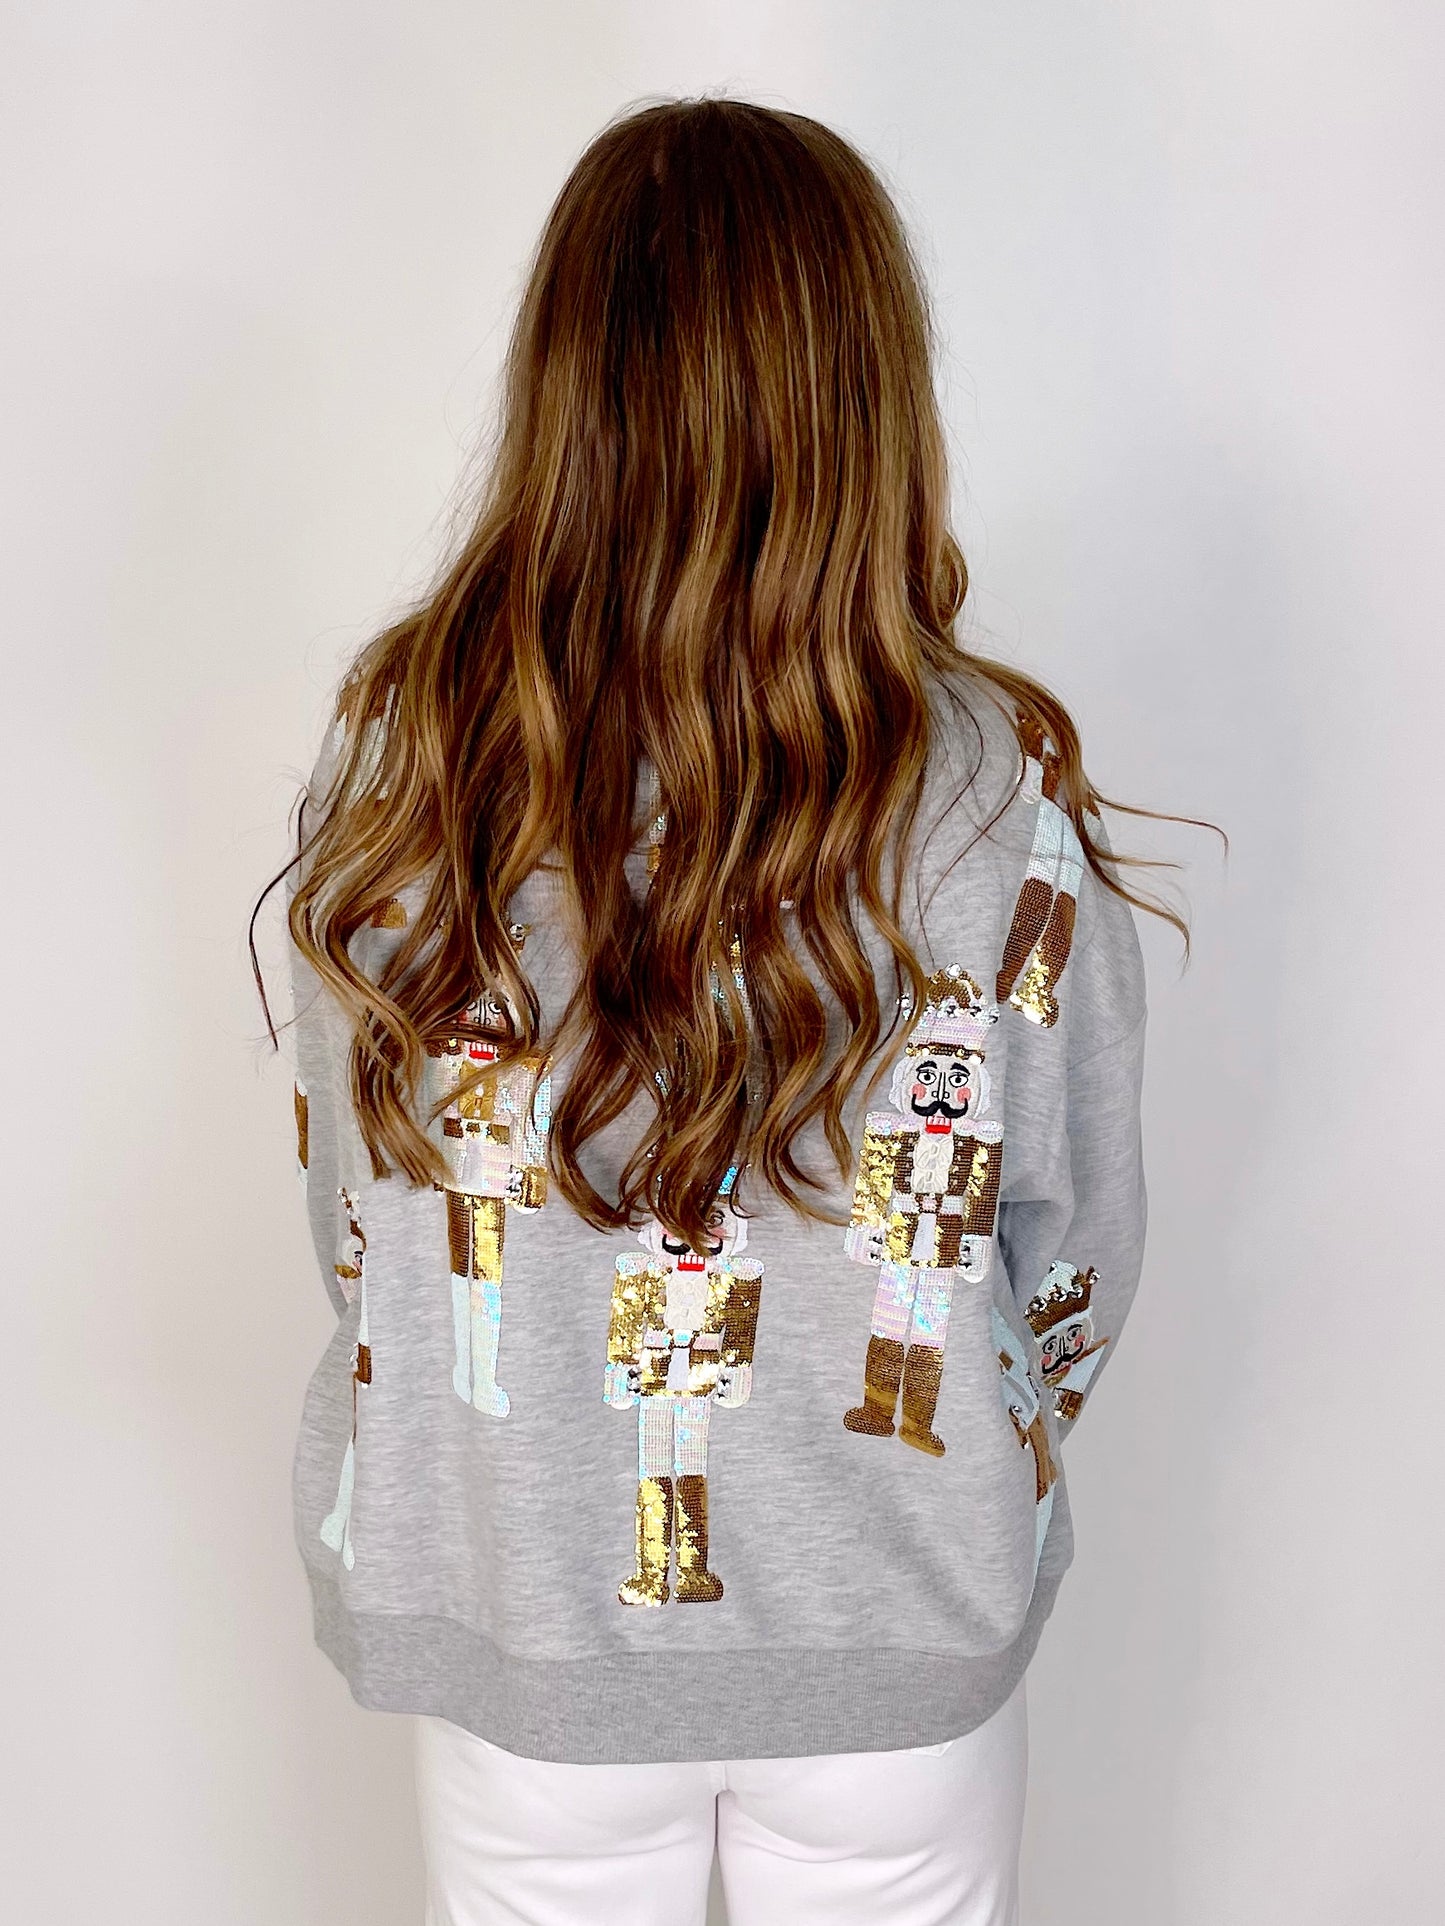 Queen of Nutcrackers Sweatshirt | Queen of Sparkles-Sweatshirt-Queen of Sparkles-The Village Shoppe, Women’s Fashion Boutique, Shop Online and In Store - Located in Muscle Shoals, AL.